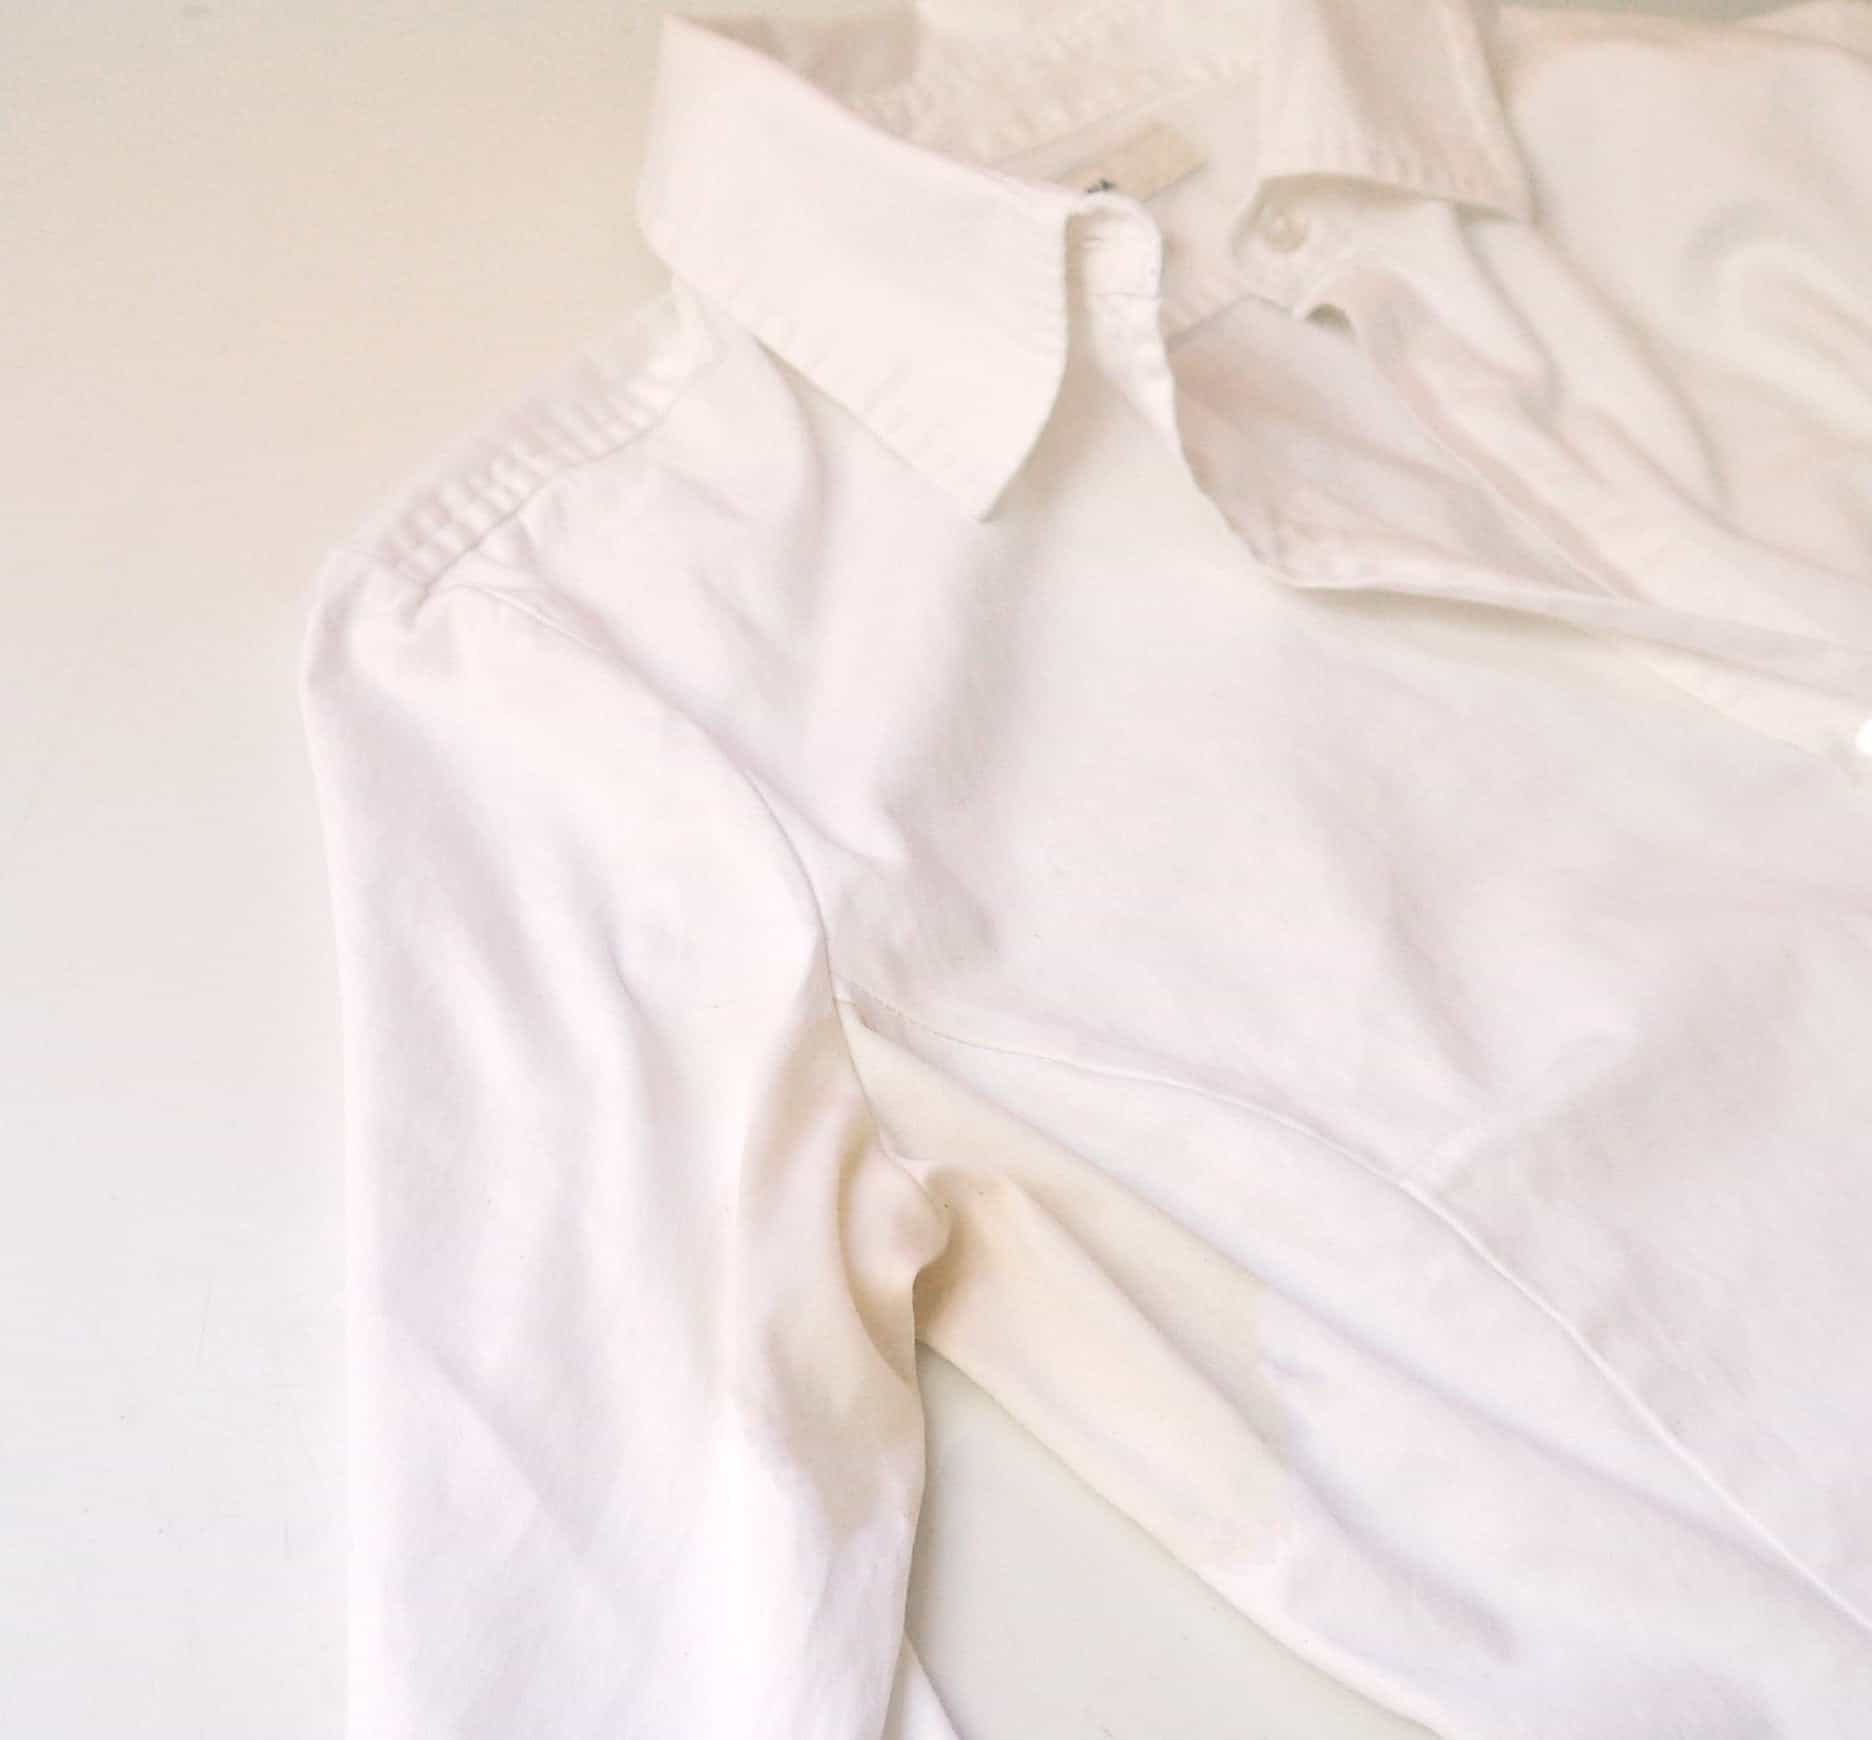 Getting rid of sweat stains